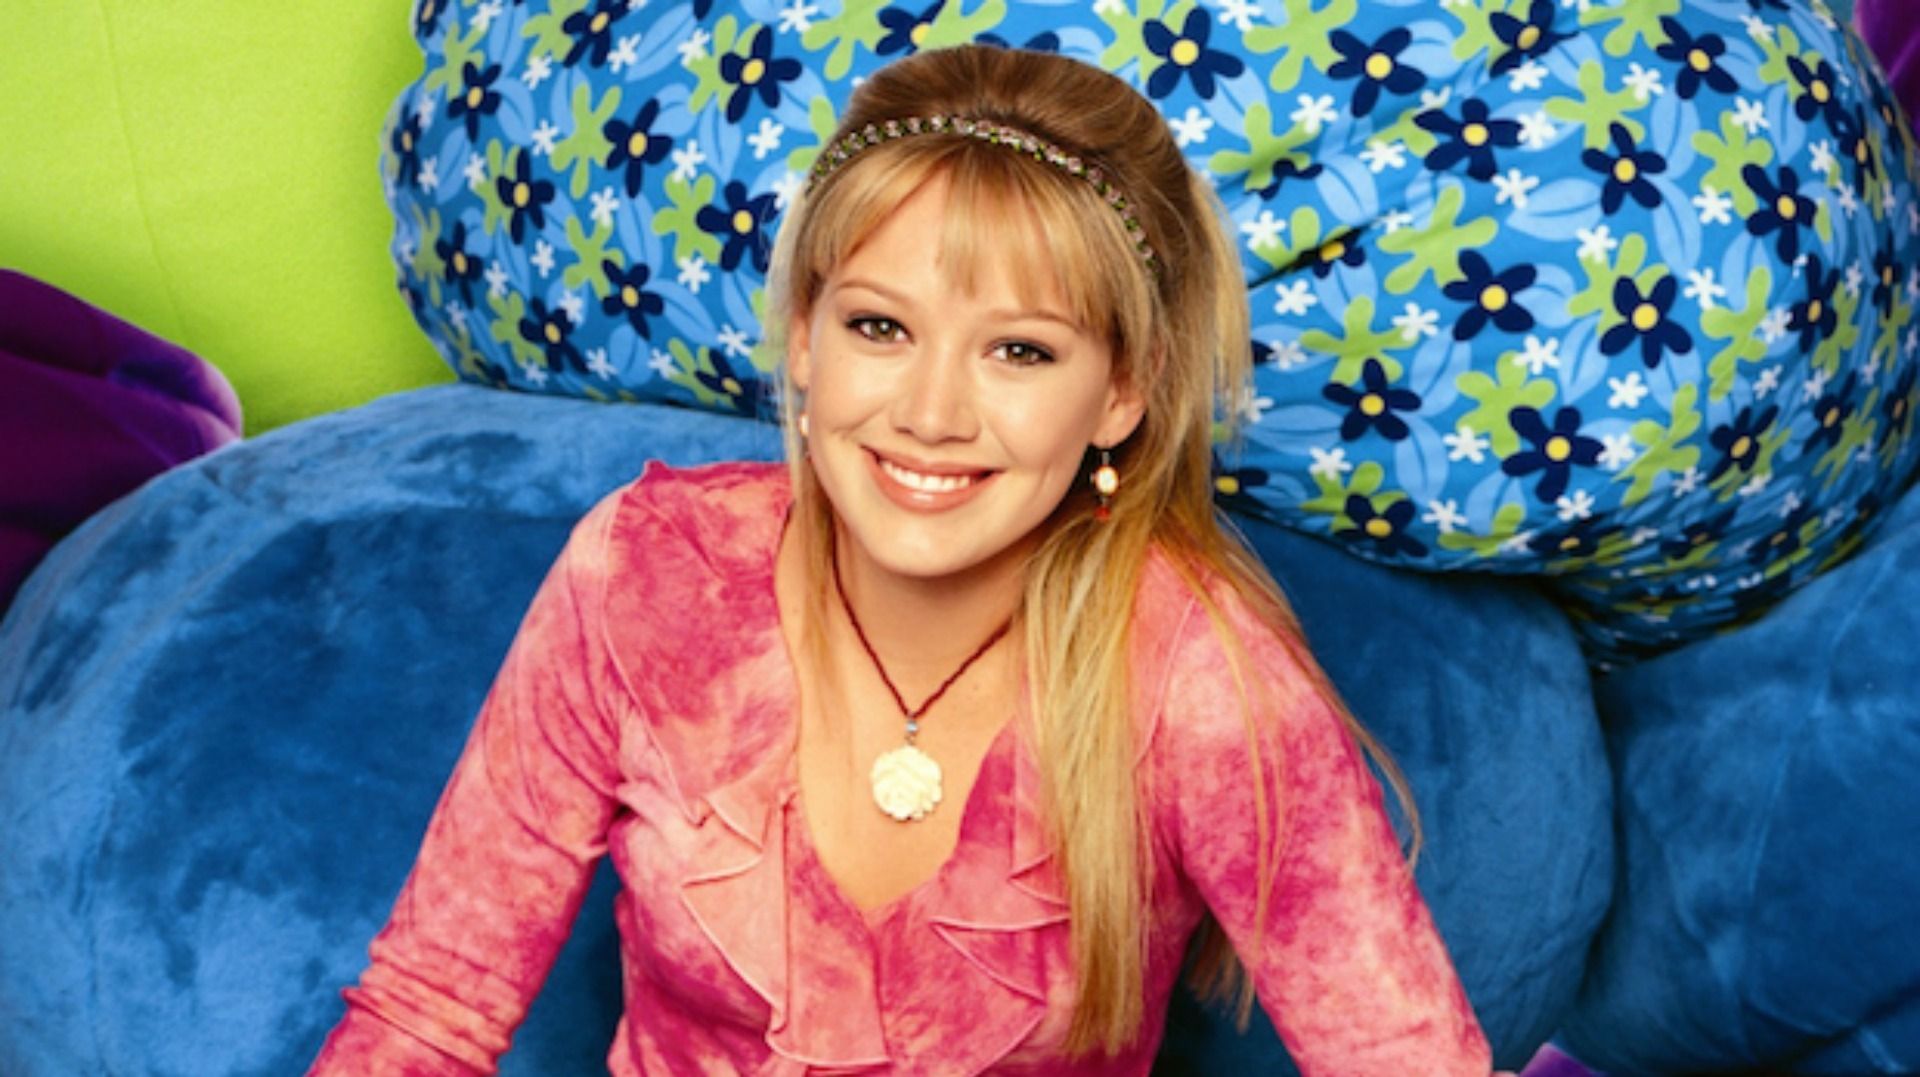  Hilary Duff smiling as Lizzie McGuire